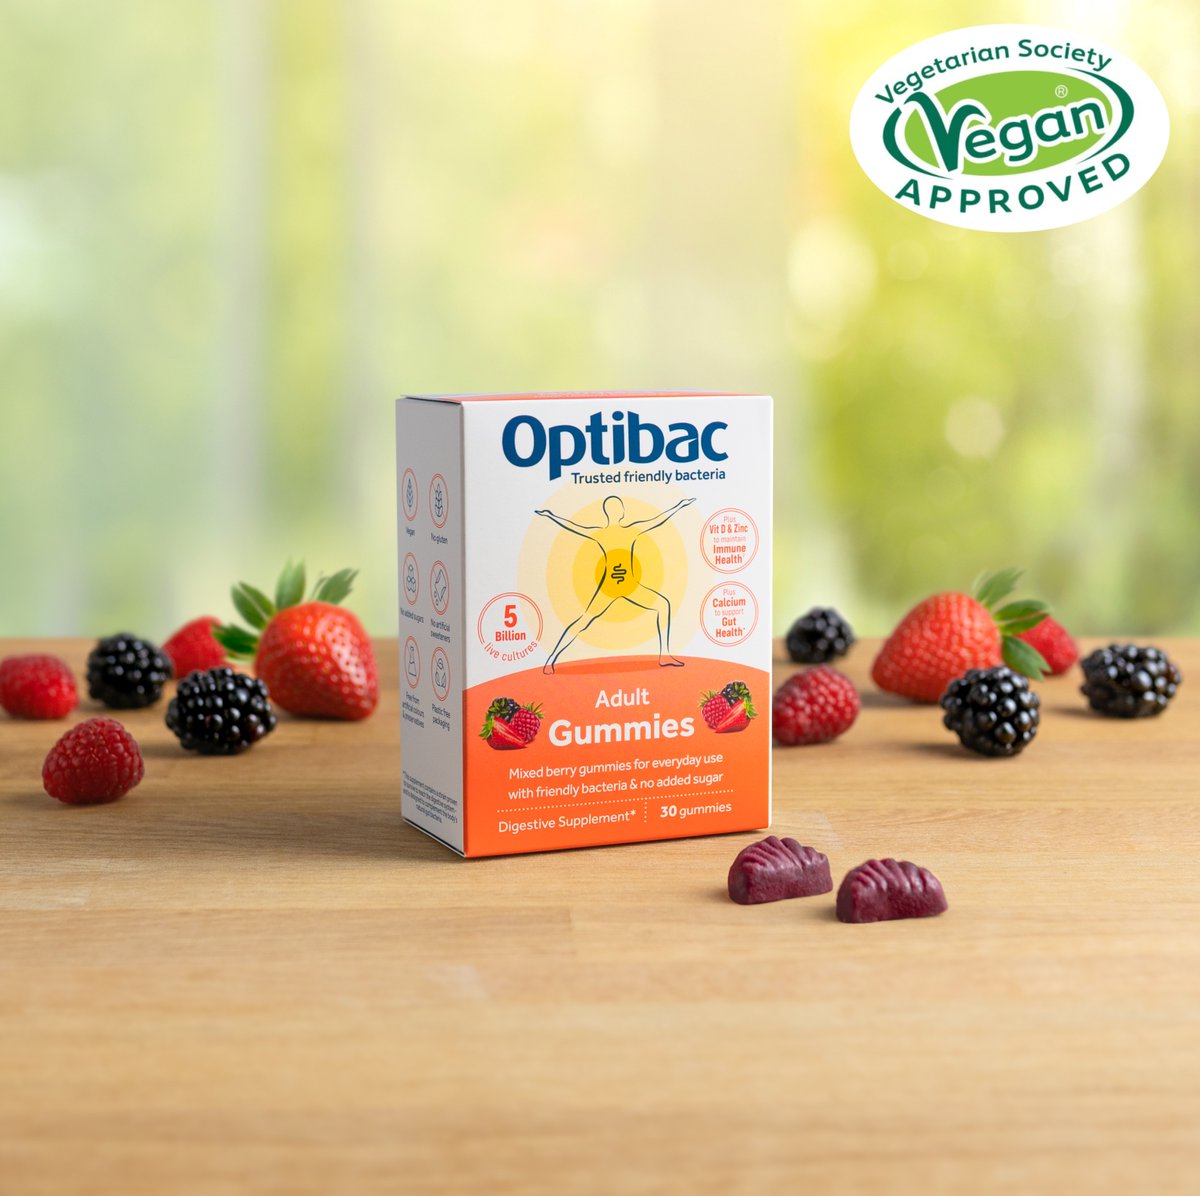 Boost your gut health the vegan way with @optibac Probiotics! 🌱 Say hello to happy tummies and a healthier you!🧡 #Vegan approved by @vegsoc✨ #VegetarianSocietyApproved #VeganWellness #OptiBac #Probiotics #VeganLifestyle #HealthyGut